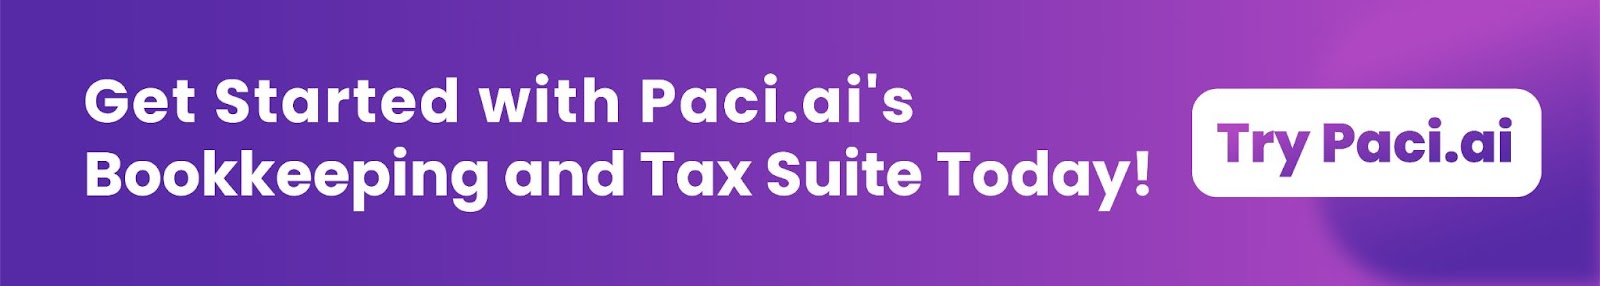 Prompt users to explore Paci.ai's bookkeeping and tax suite for financial management purposes